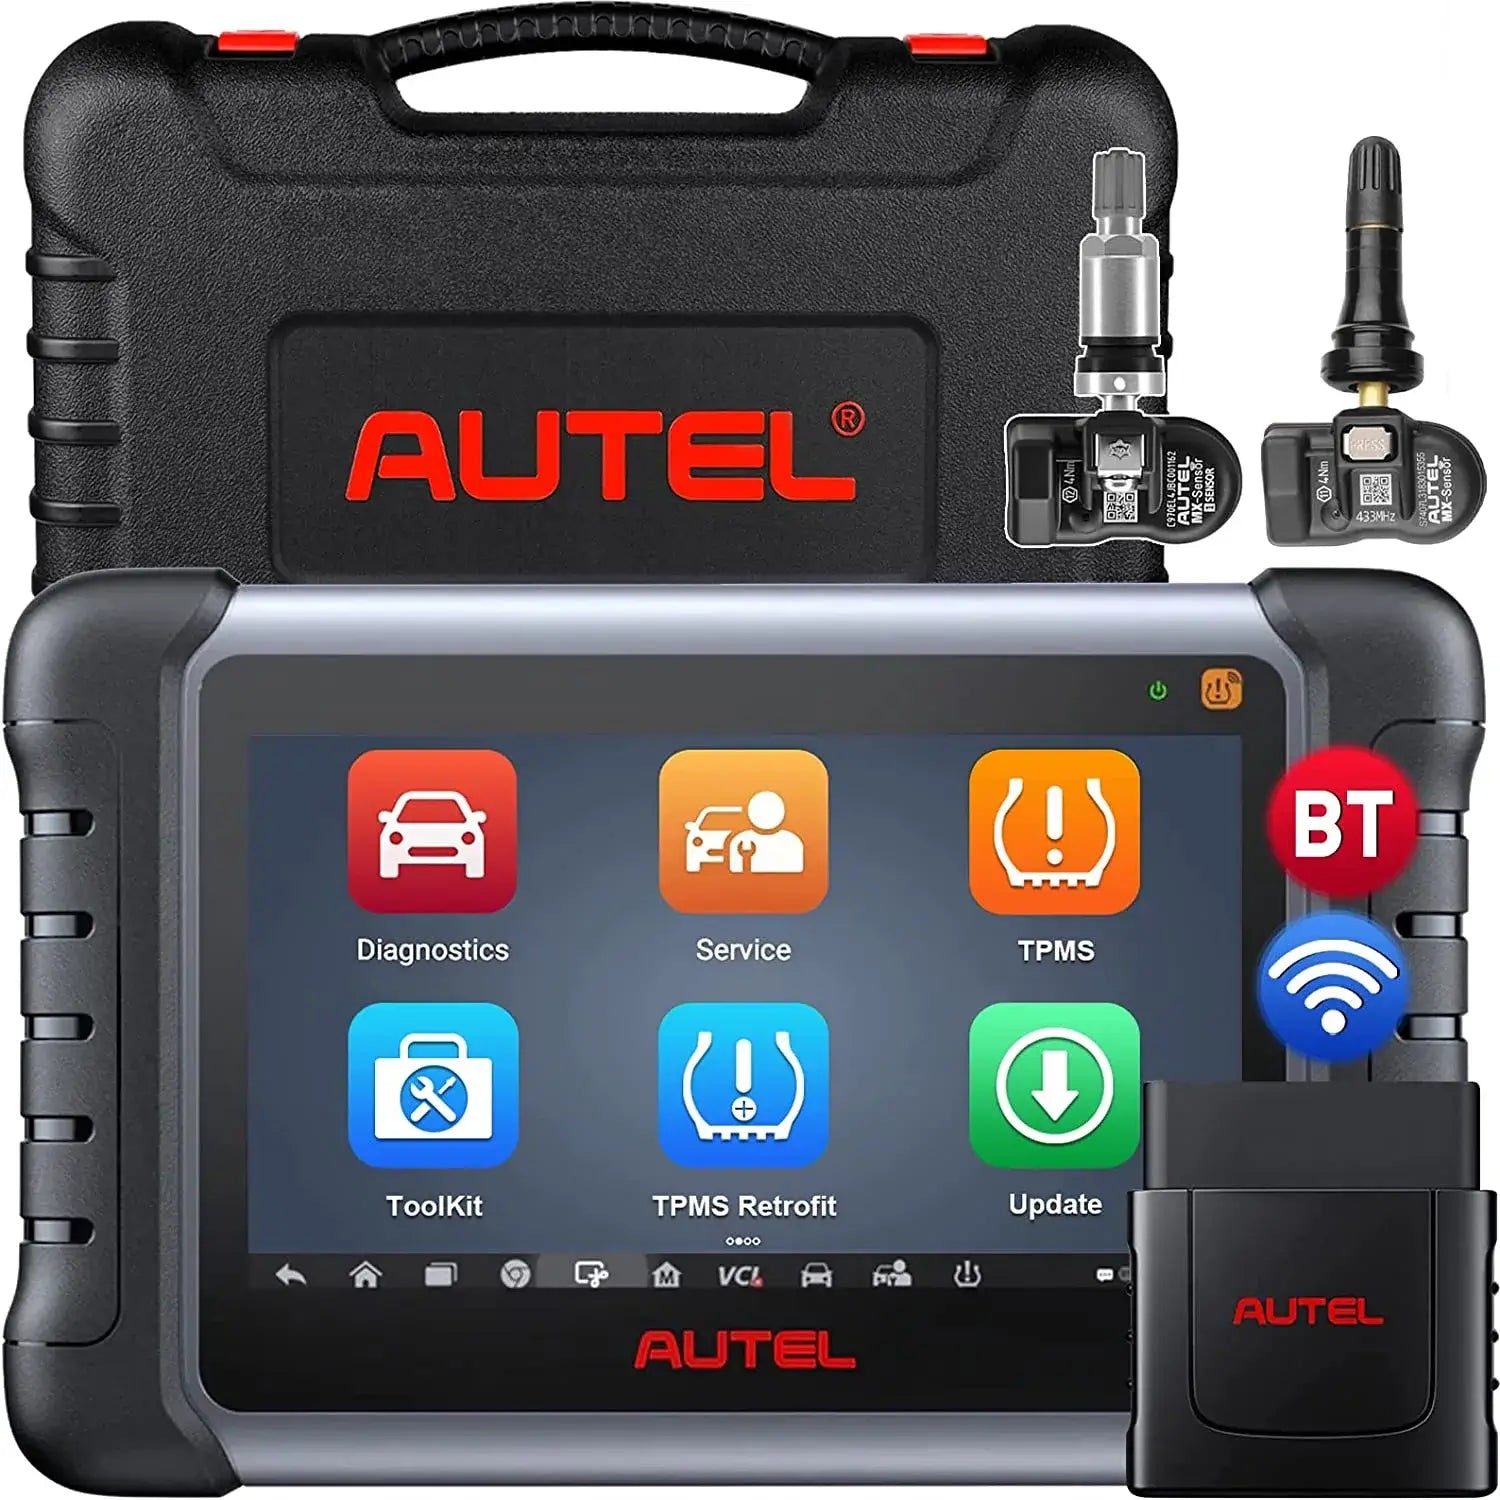 [2 Years Update]Autel Scanner MaxiPRO MP808Z-TS All System Auto Diagnostics Relearn Tools with Battery & TPMS Testing, Android 11 Based Bi-Directional Control, ECU Coding, Full TPMS and 36+ Services